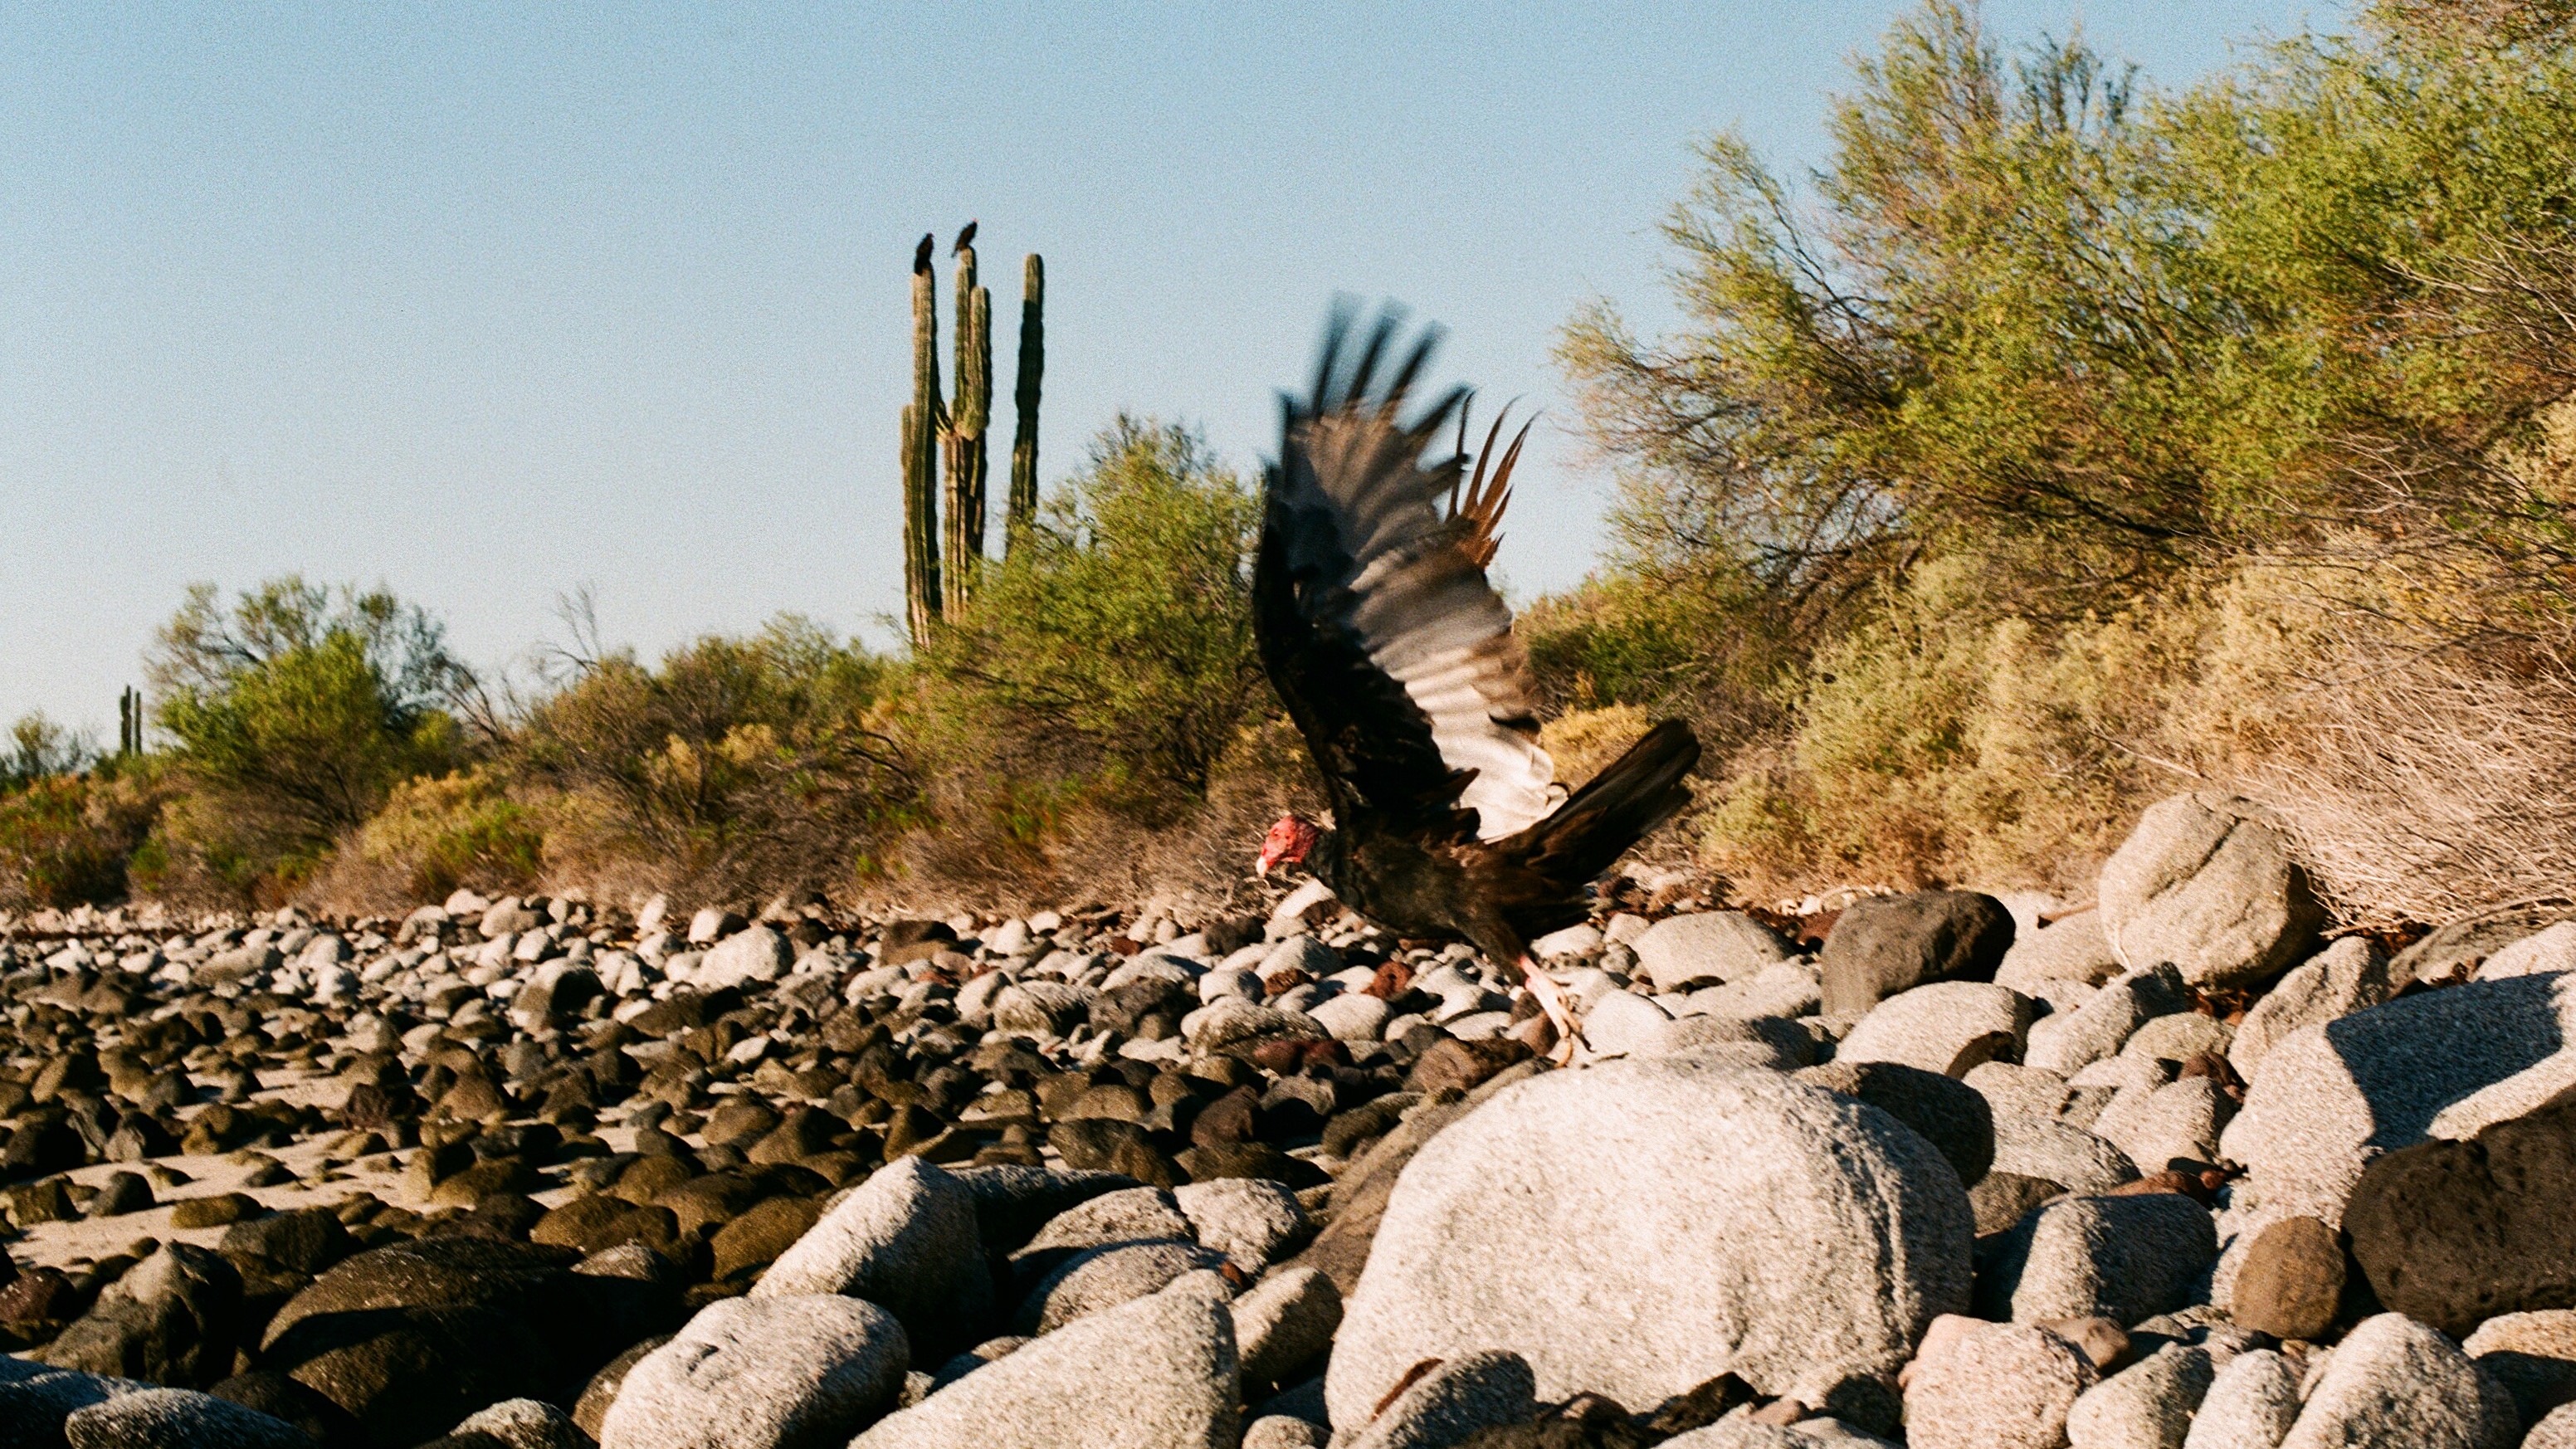 The vulture, viewed biblically as a renewer, purifier and bringer of transformation, is often sighted in the region. Indeed, this animal is an extremely important fixture of the Baja environment in its ability to clean the land of carrion. 